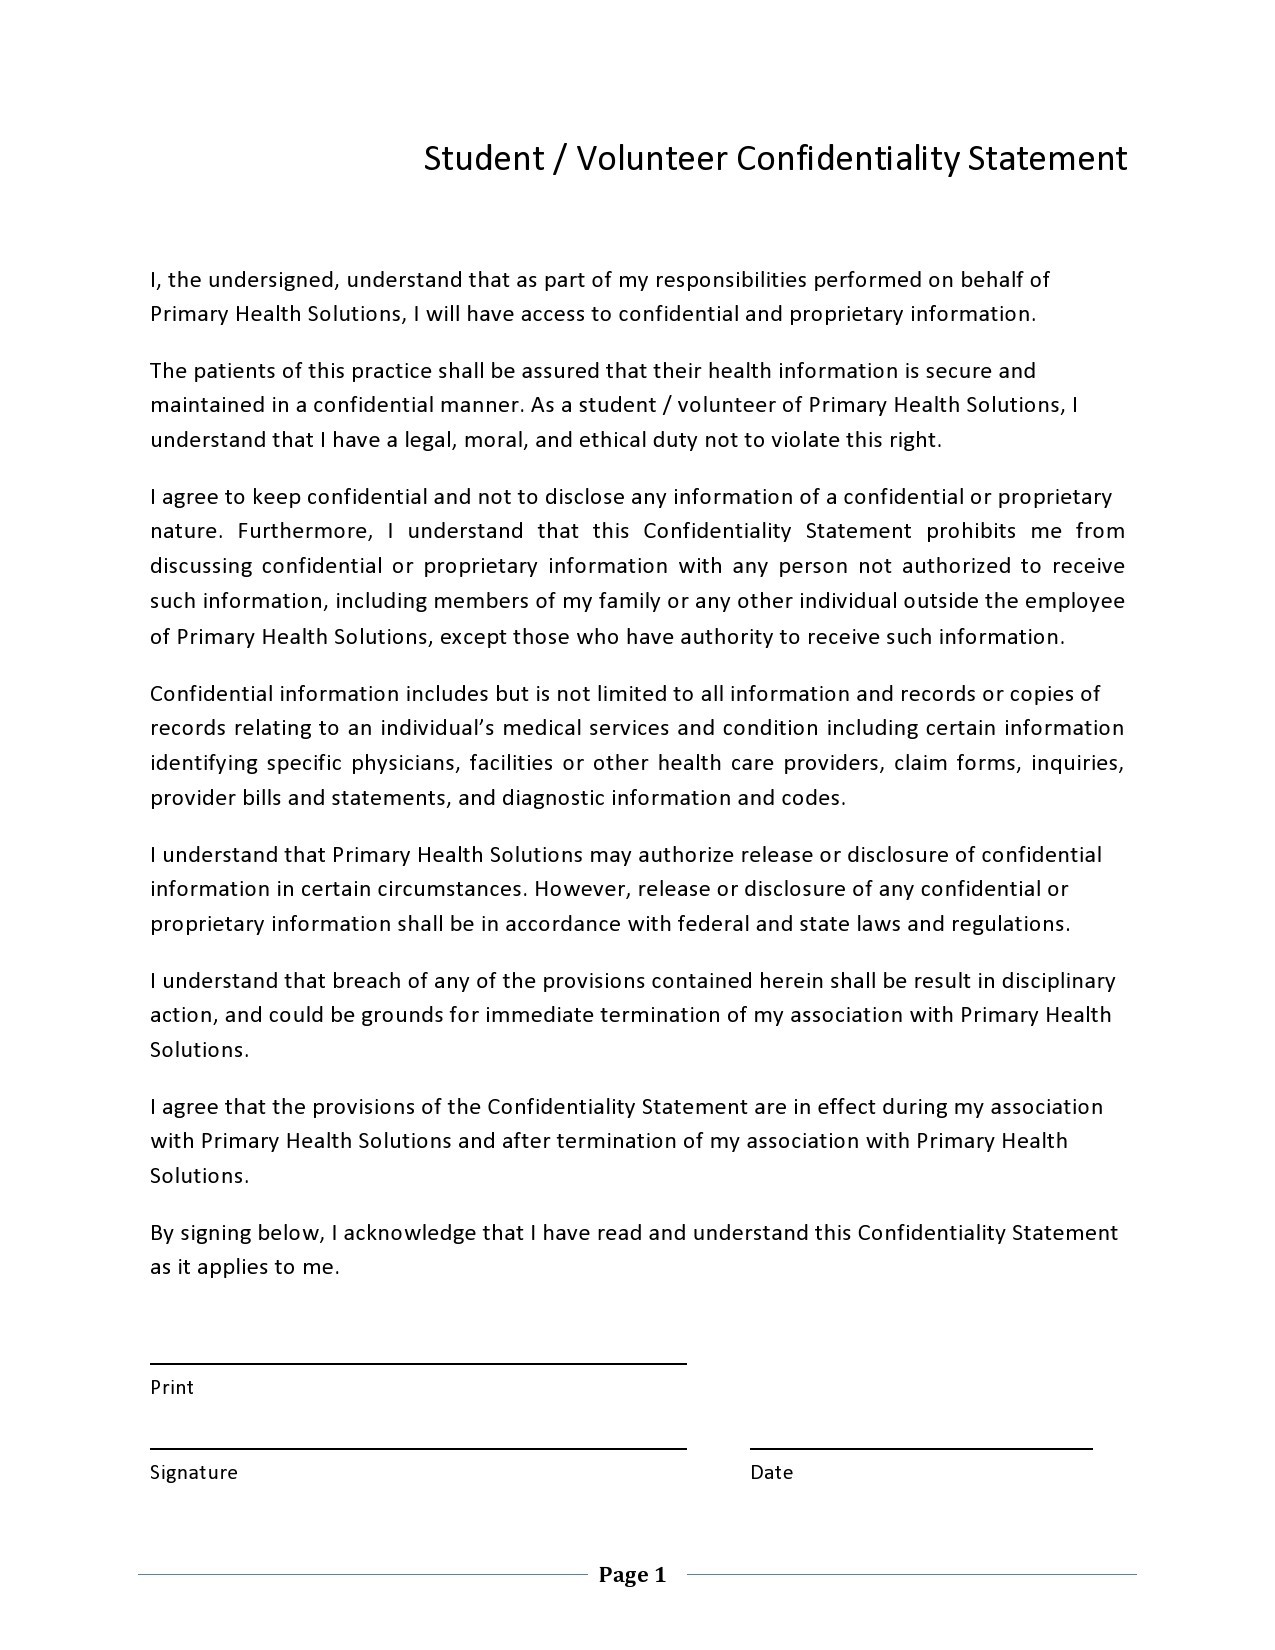 Free confidentiality statement 18